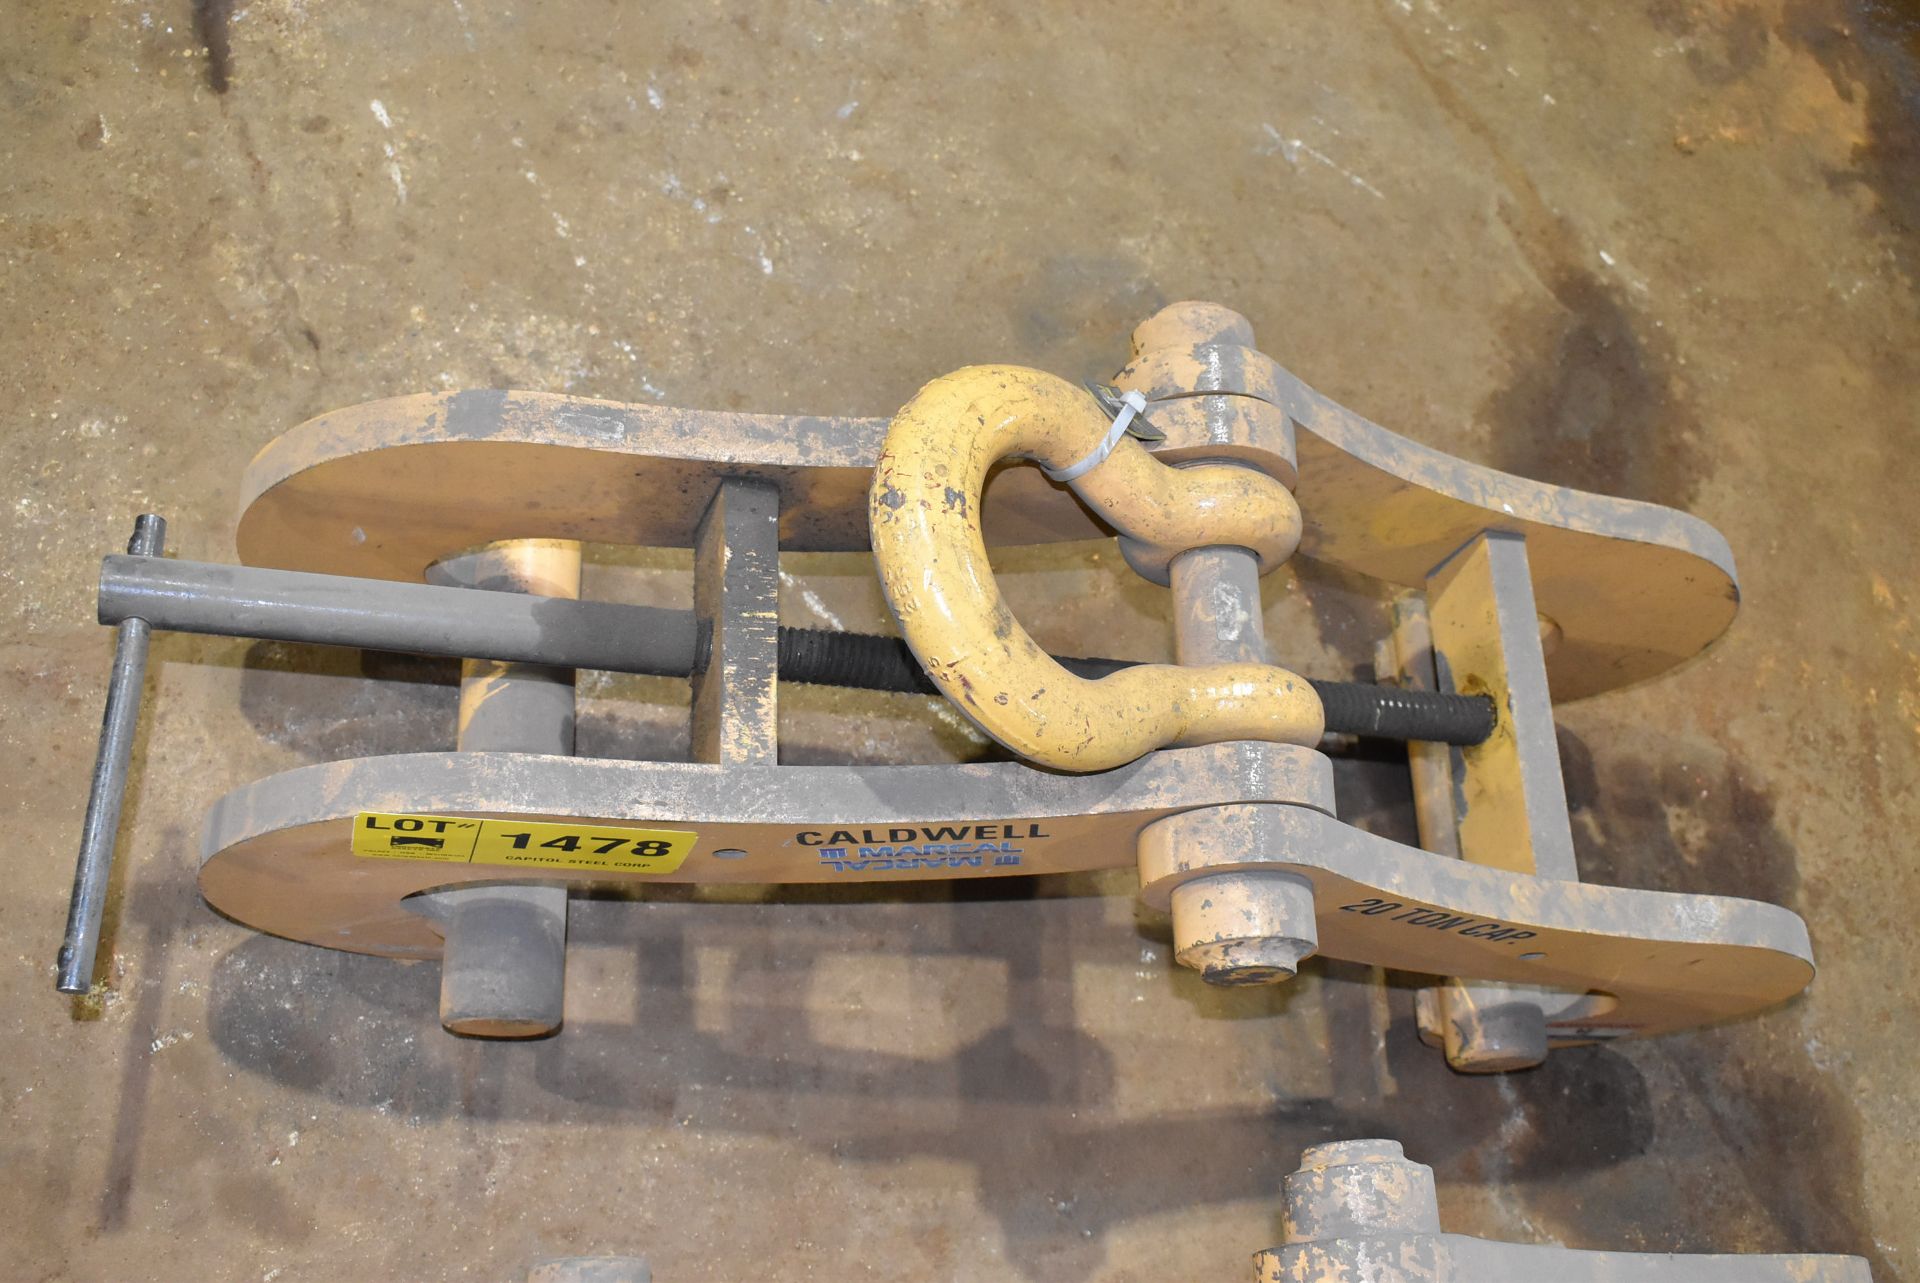 CALDWELL 20 TON CAPACITY BEAM CLAMP [RIGGING FEES FOR LOT #1478 - $30 USD PLUS APPLICABLE TAXES]